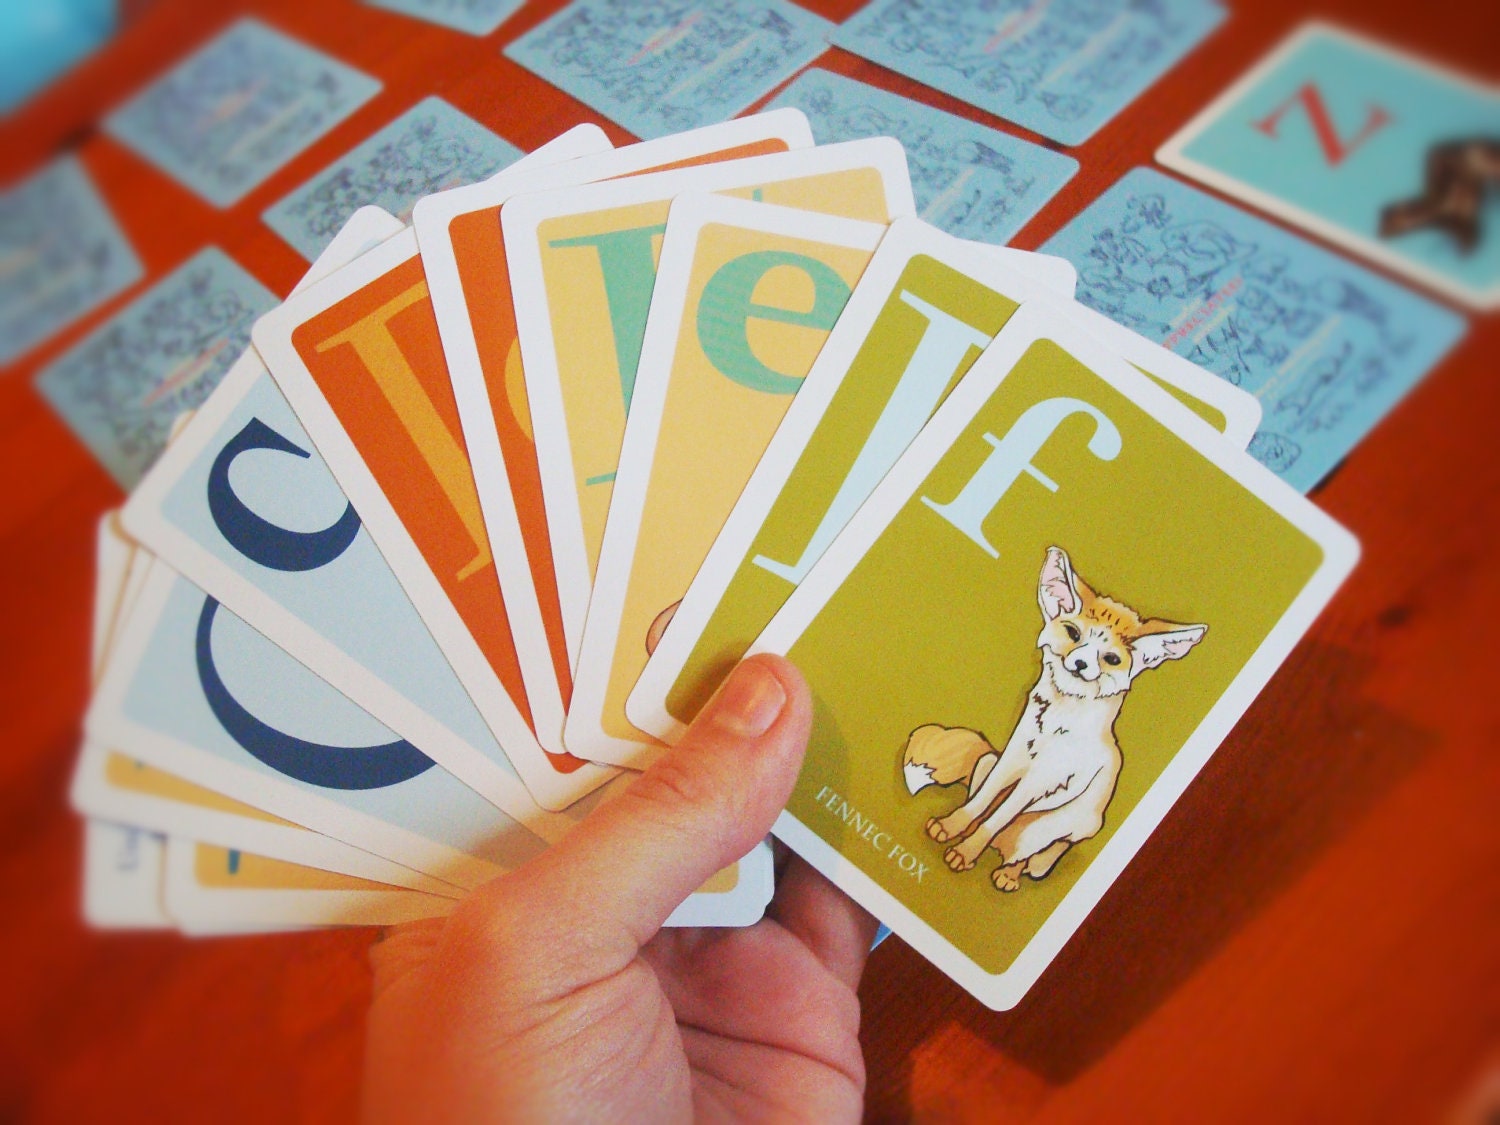 What are some educational card games for kids?